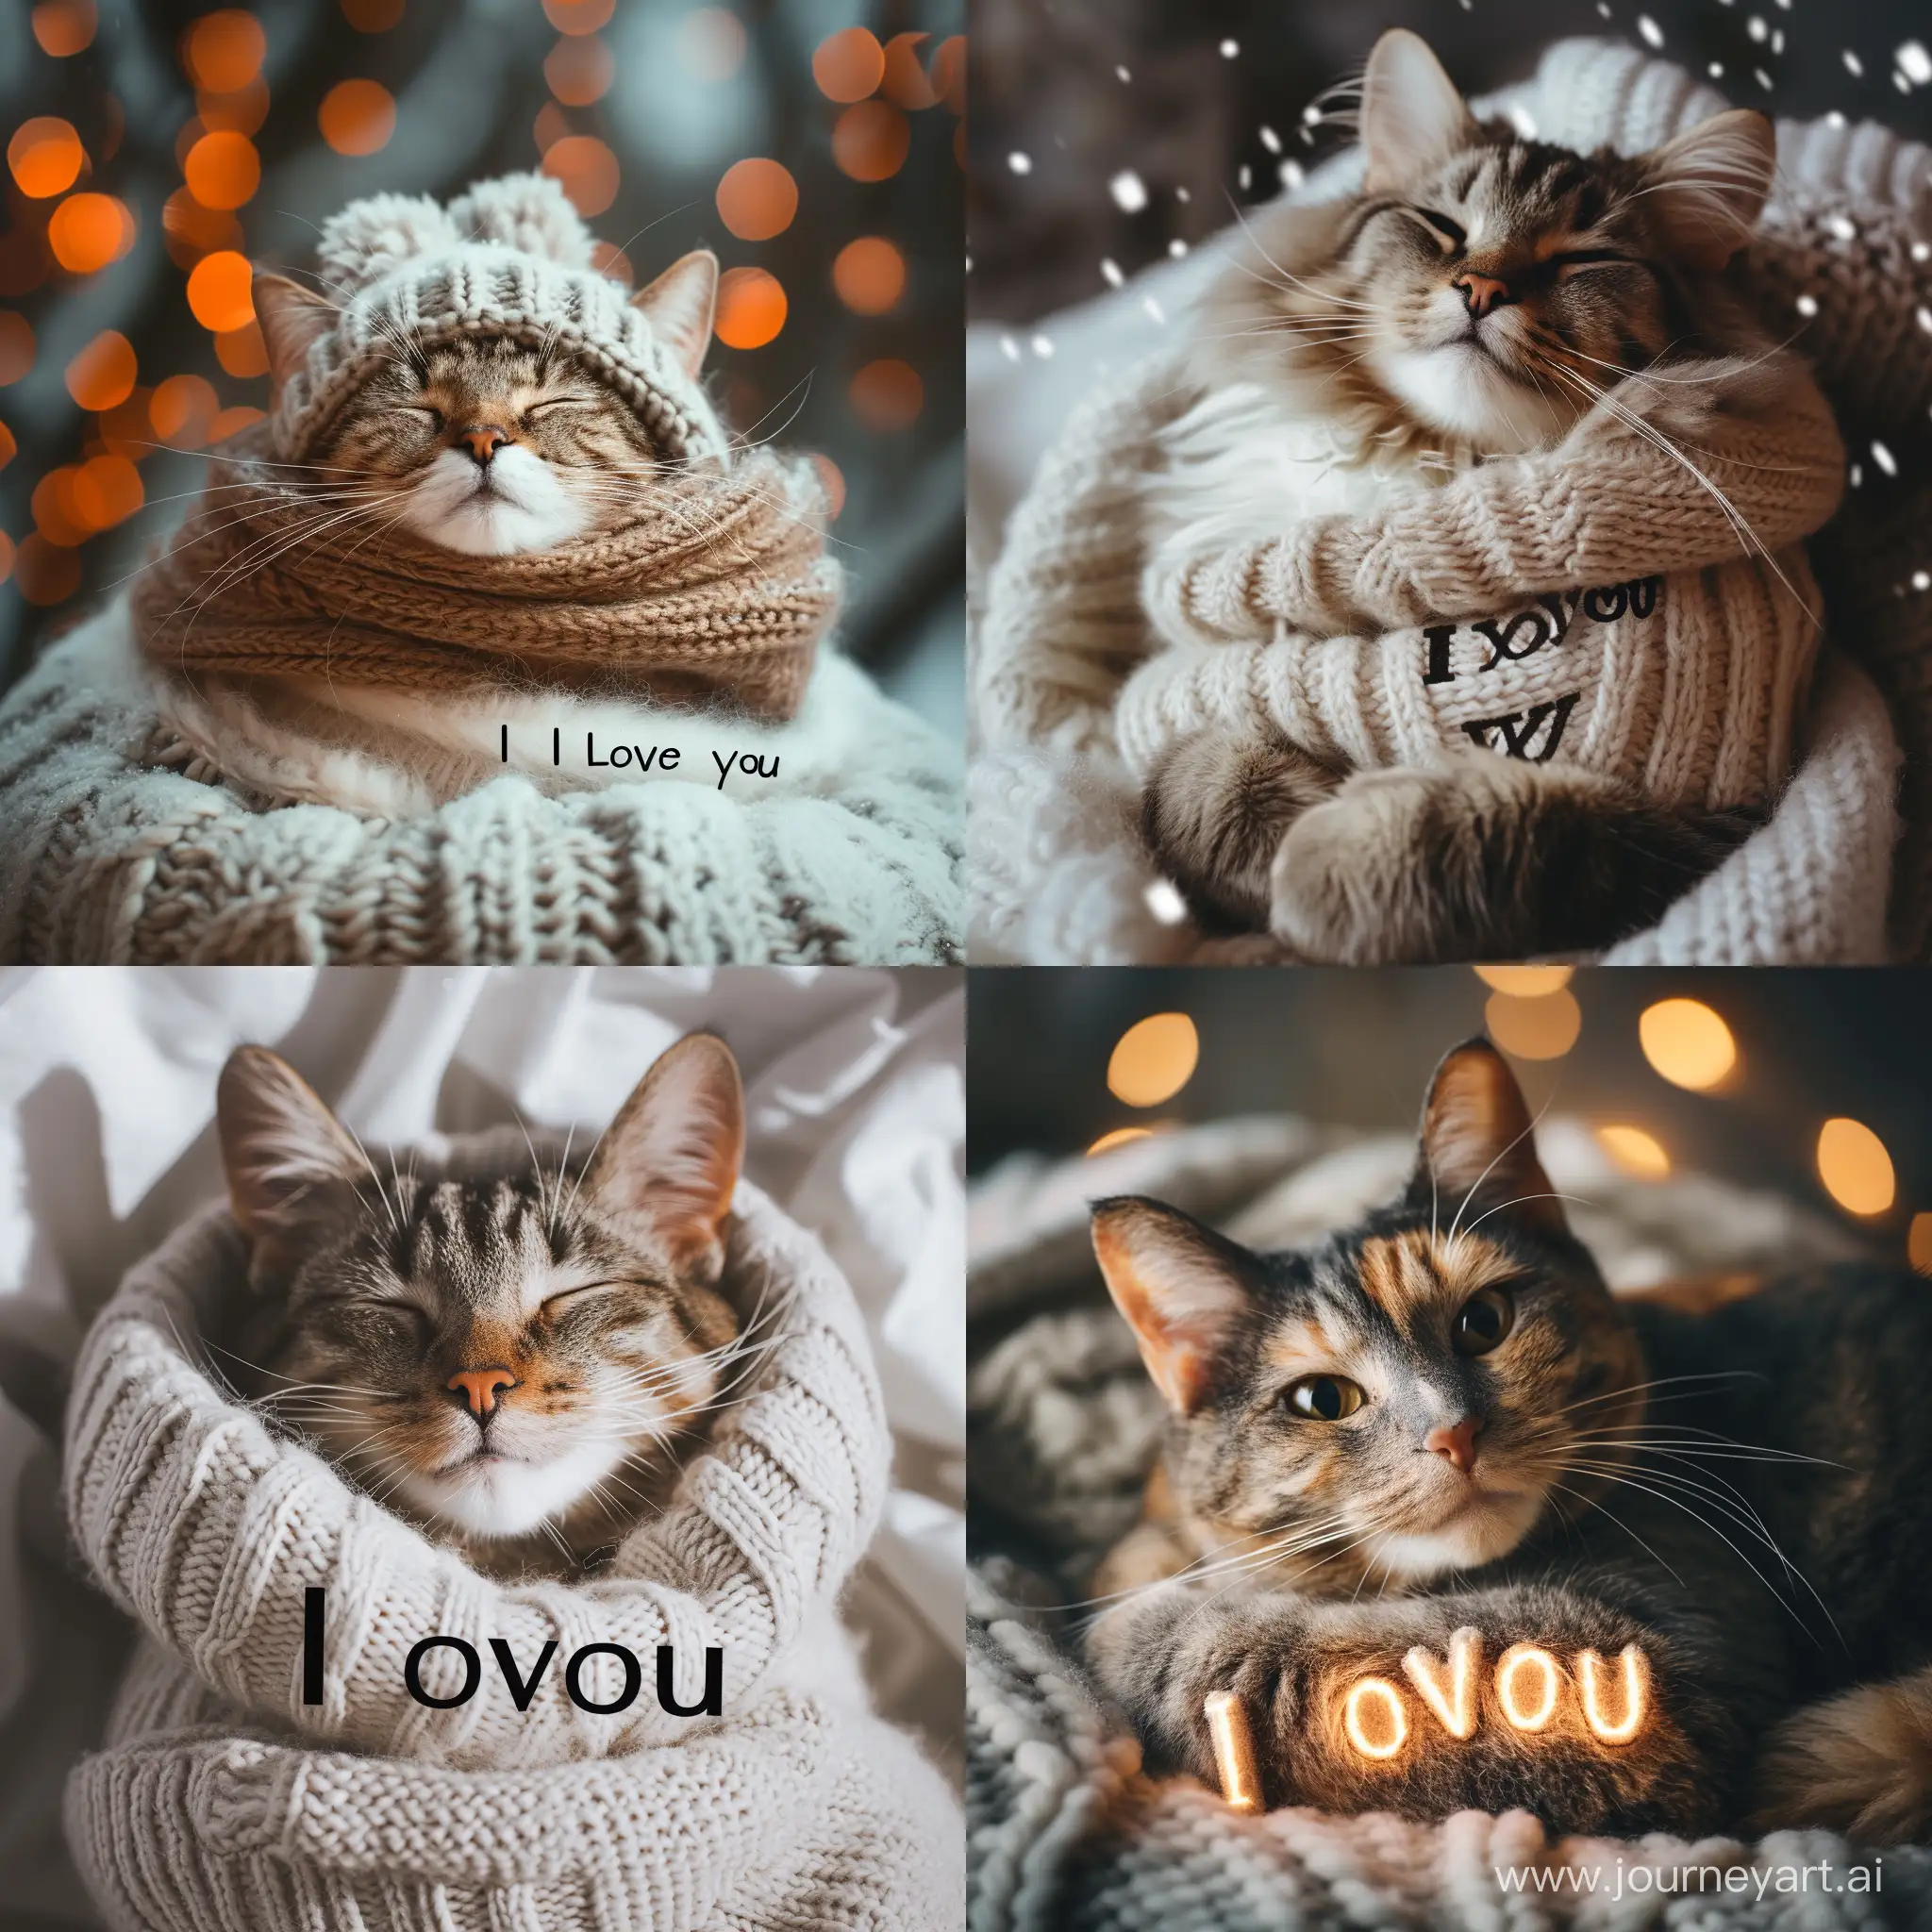 cat with text "I love you", 4k photo, winter, cozy, happy